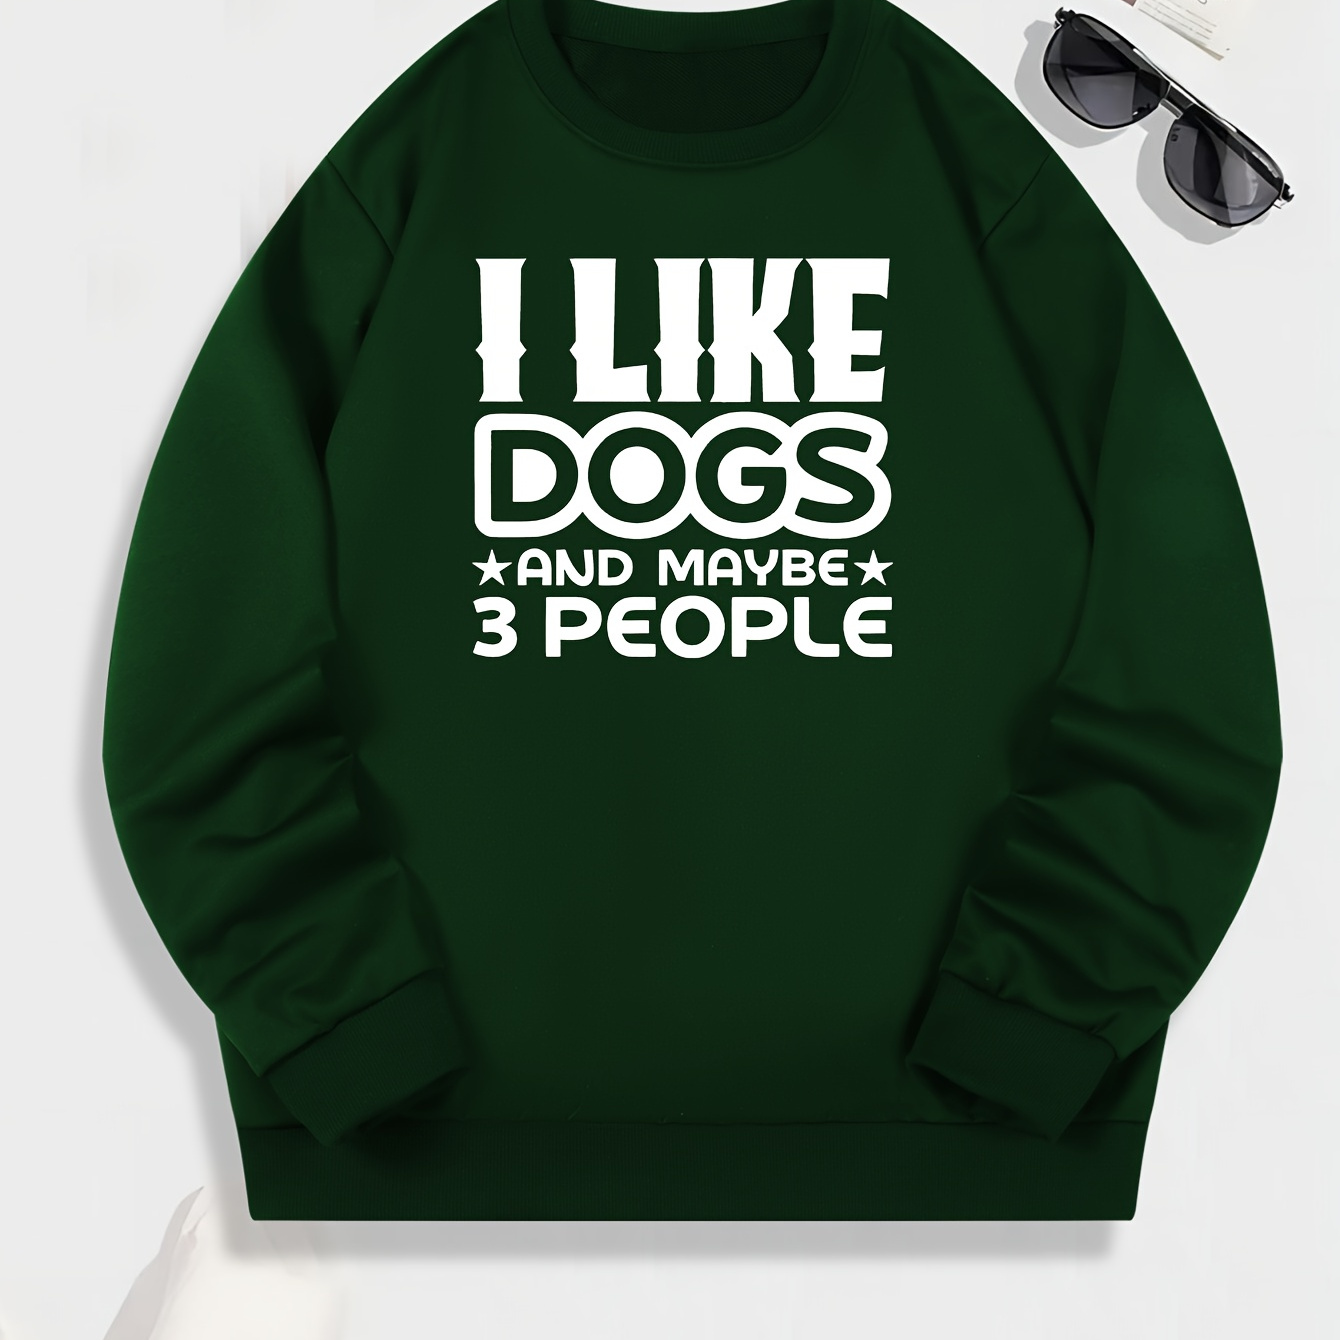 

I Like Dogs And Maybe 3 People Print, Sweatshirt With Long Sleeves, Men's Creative Slightly Flex Crew Neck Pullover For Spring Fall And Winter